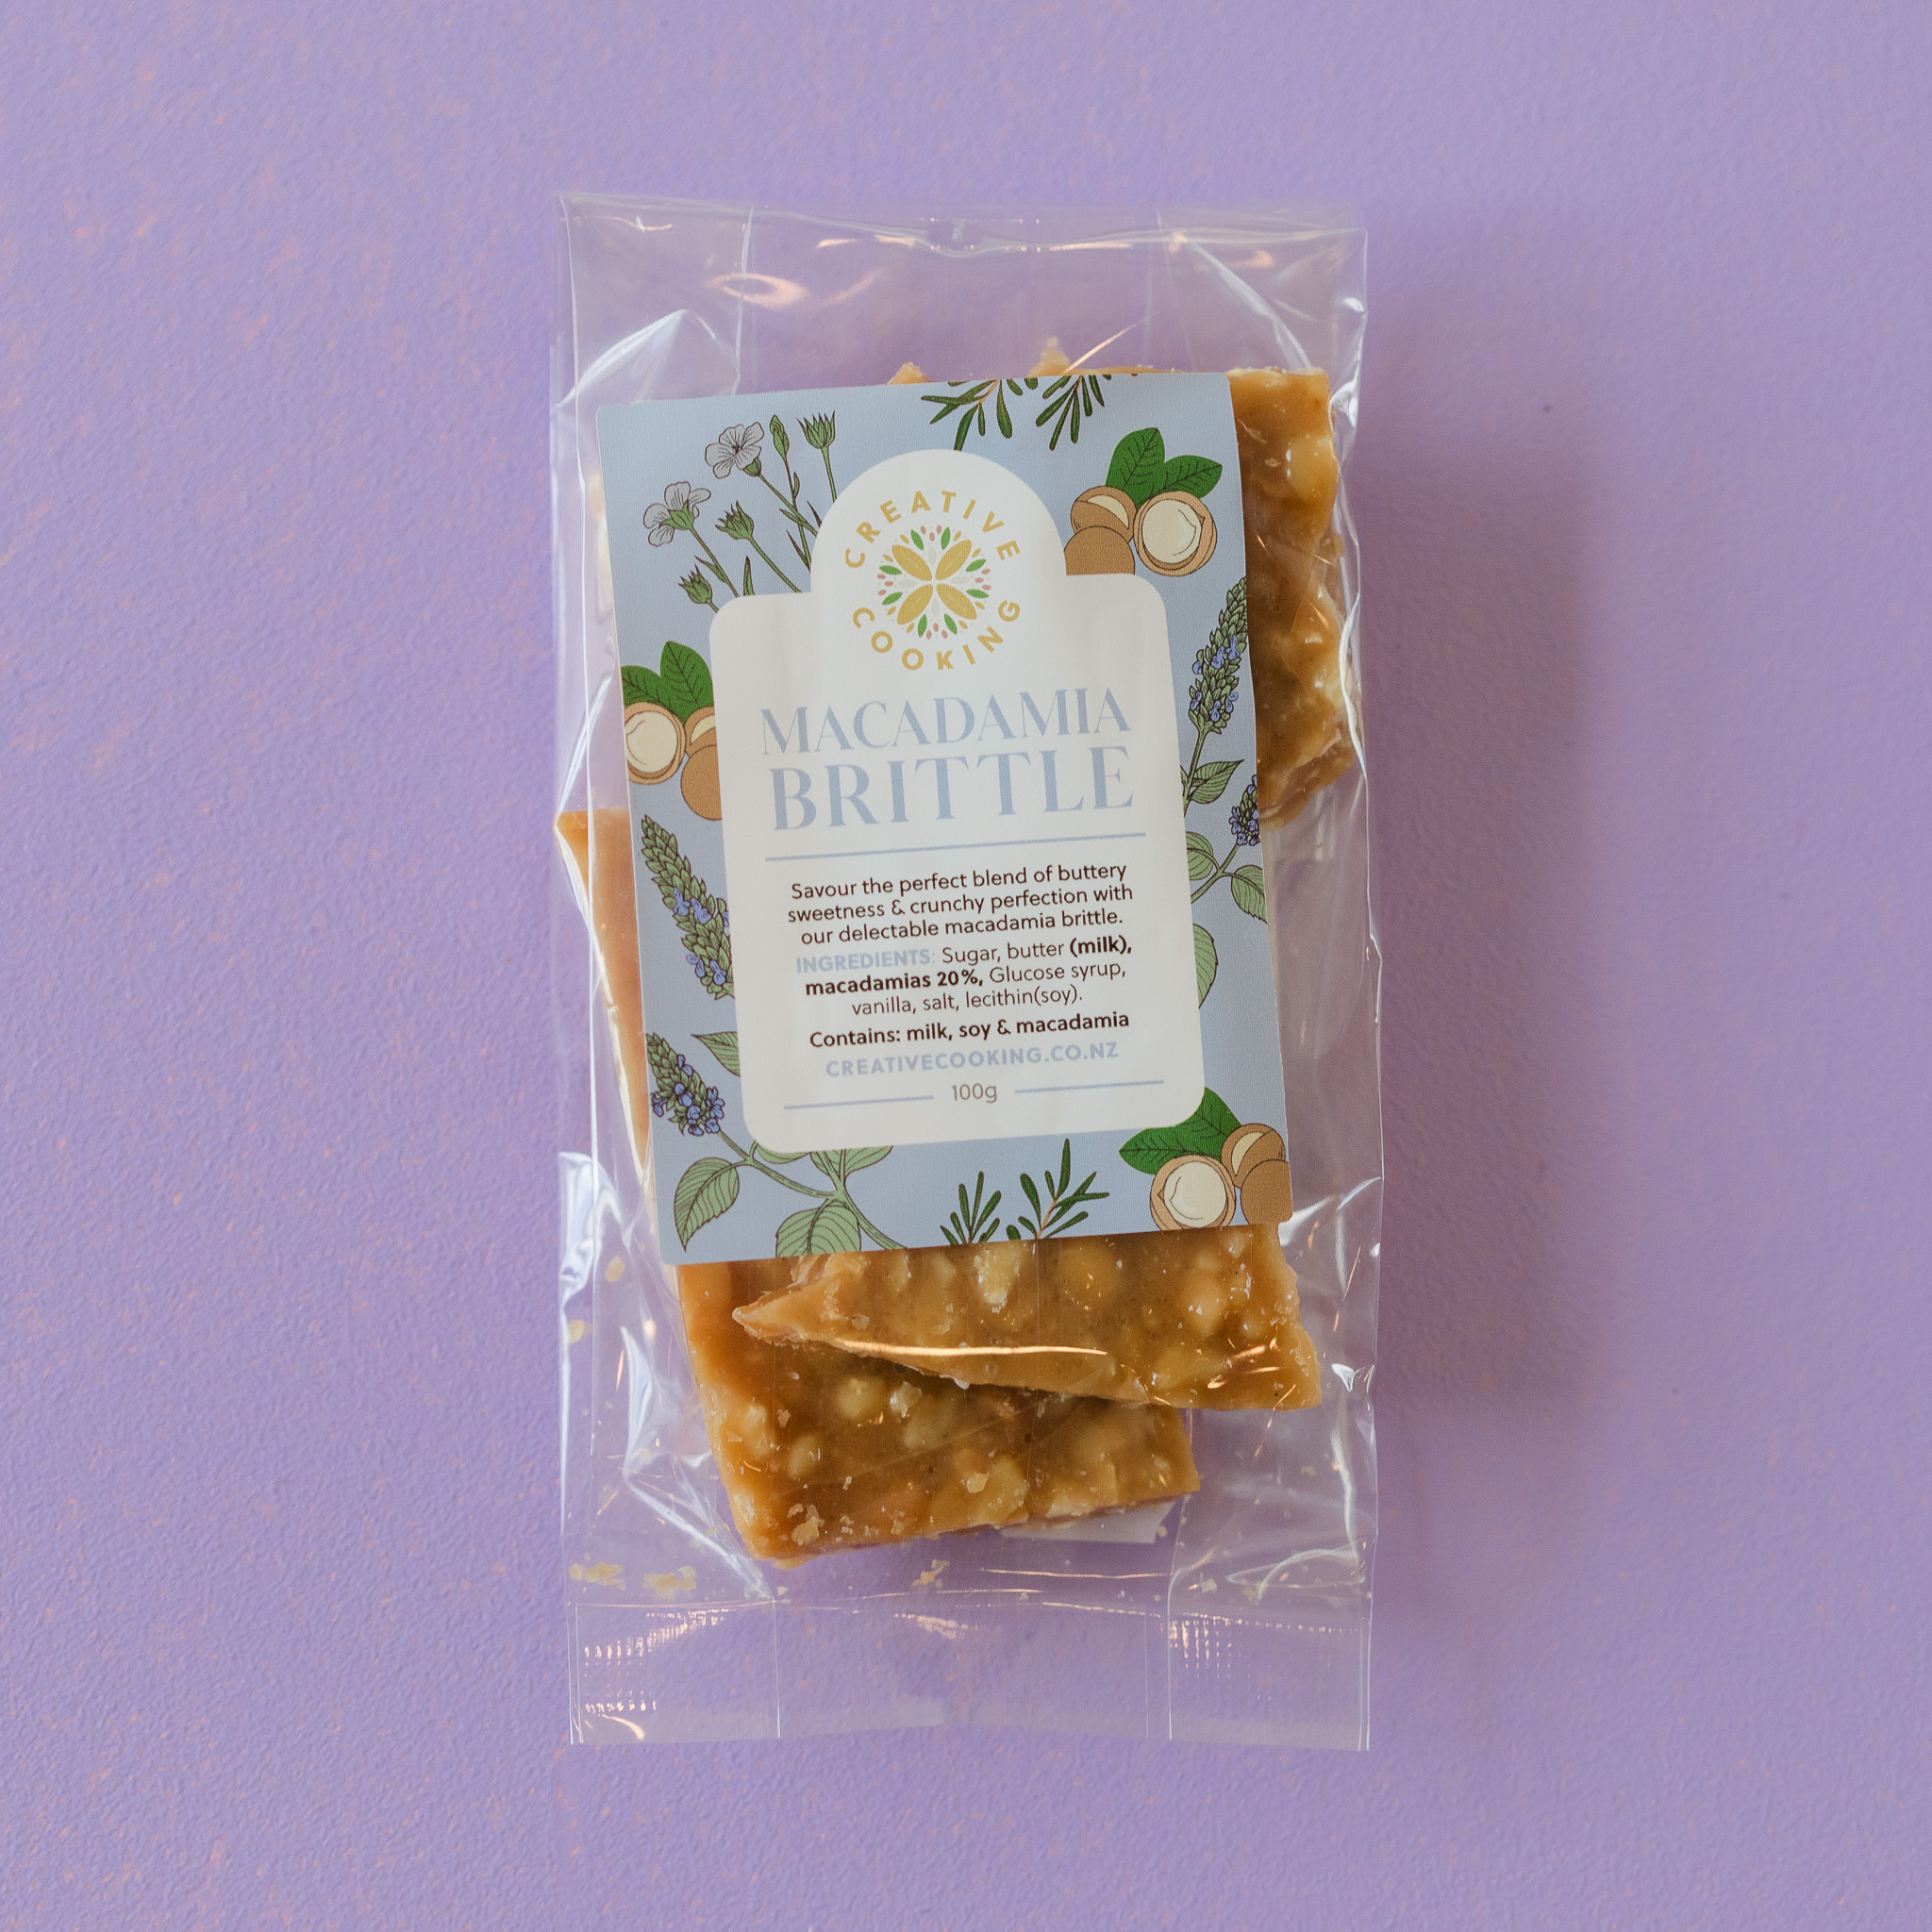 Macadamia Brittle by Superseed Crackers against purple background